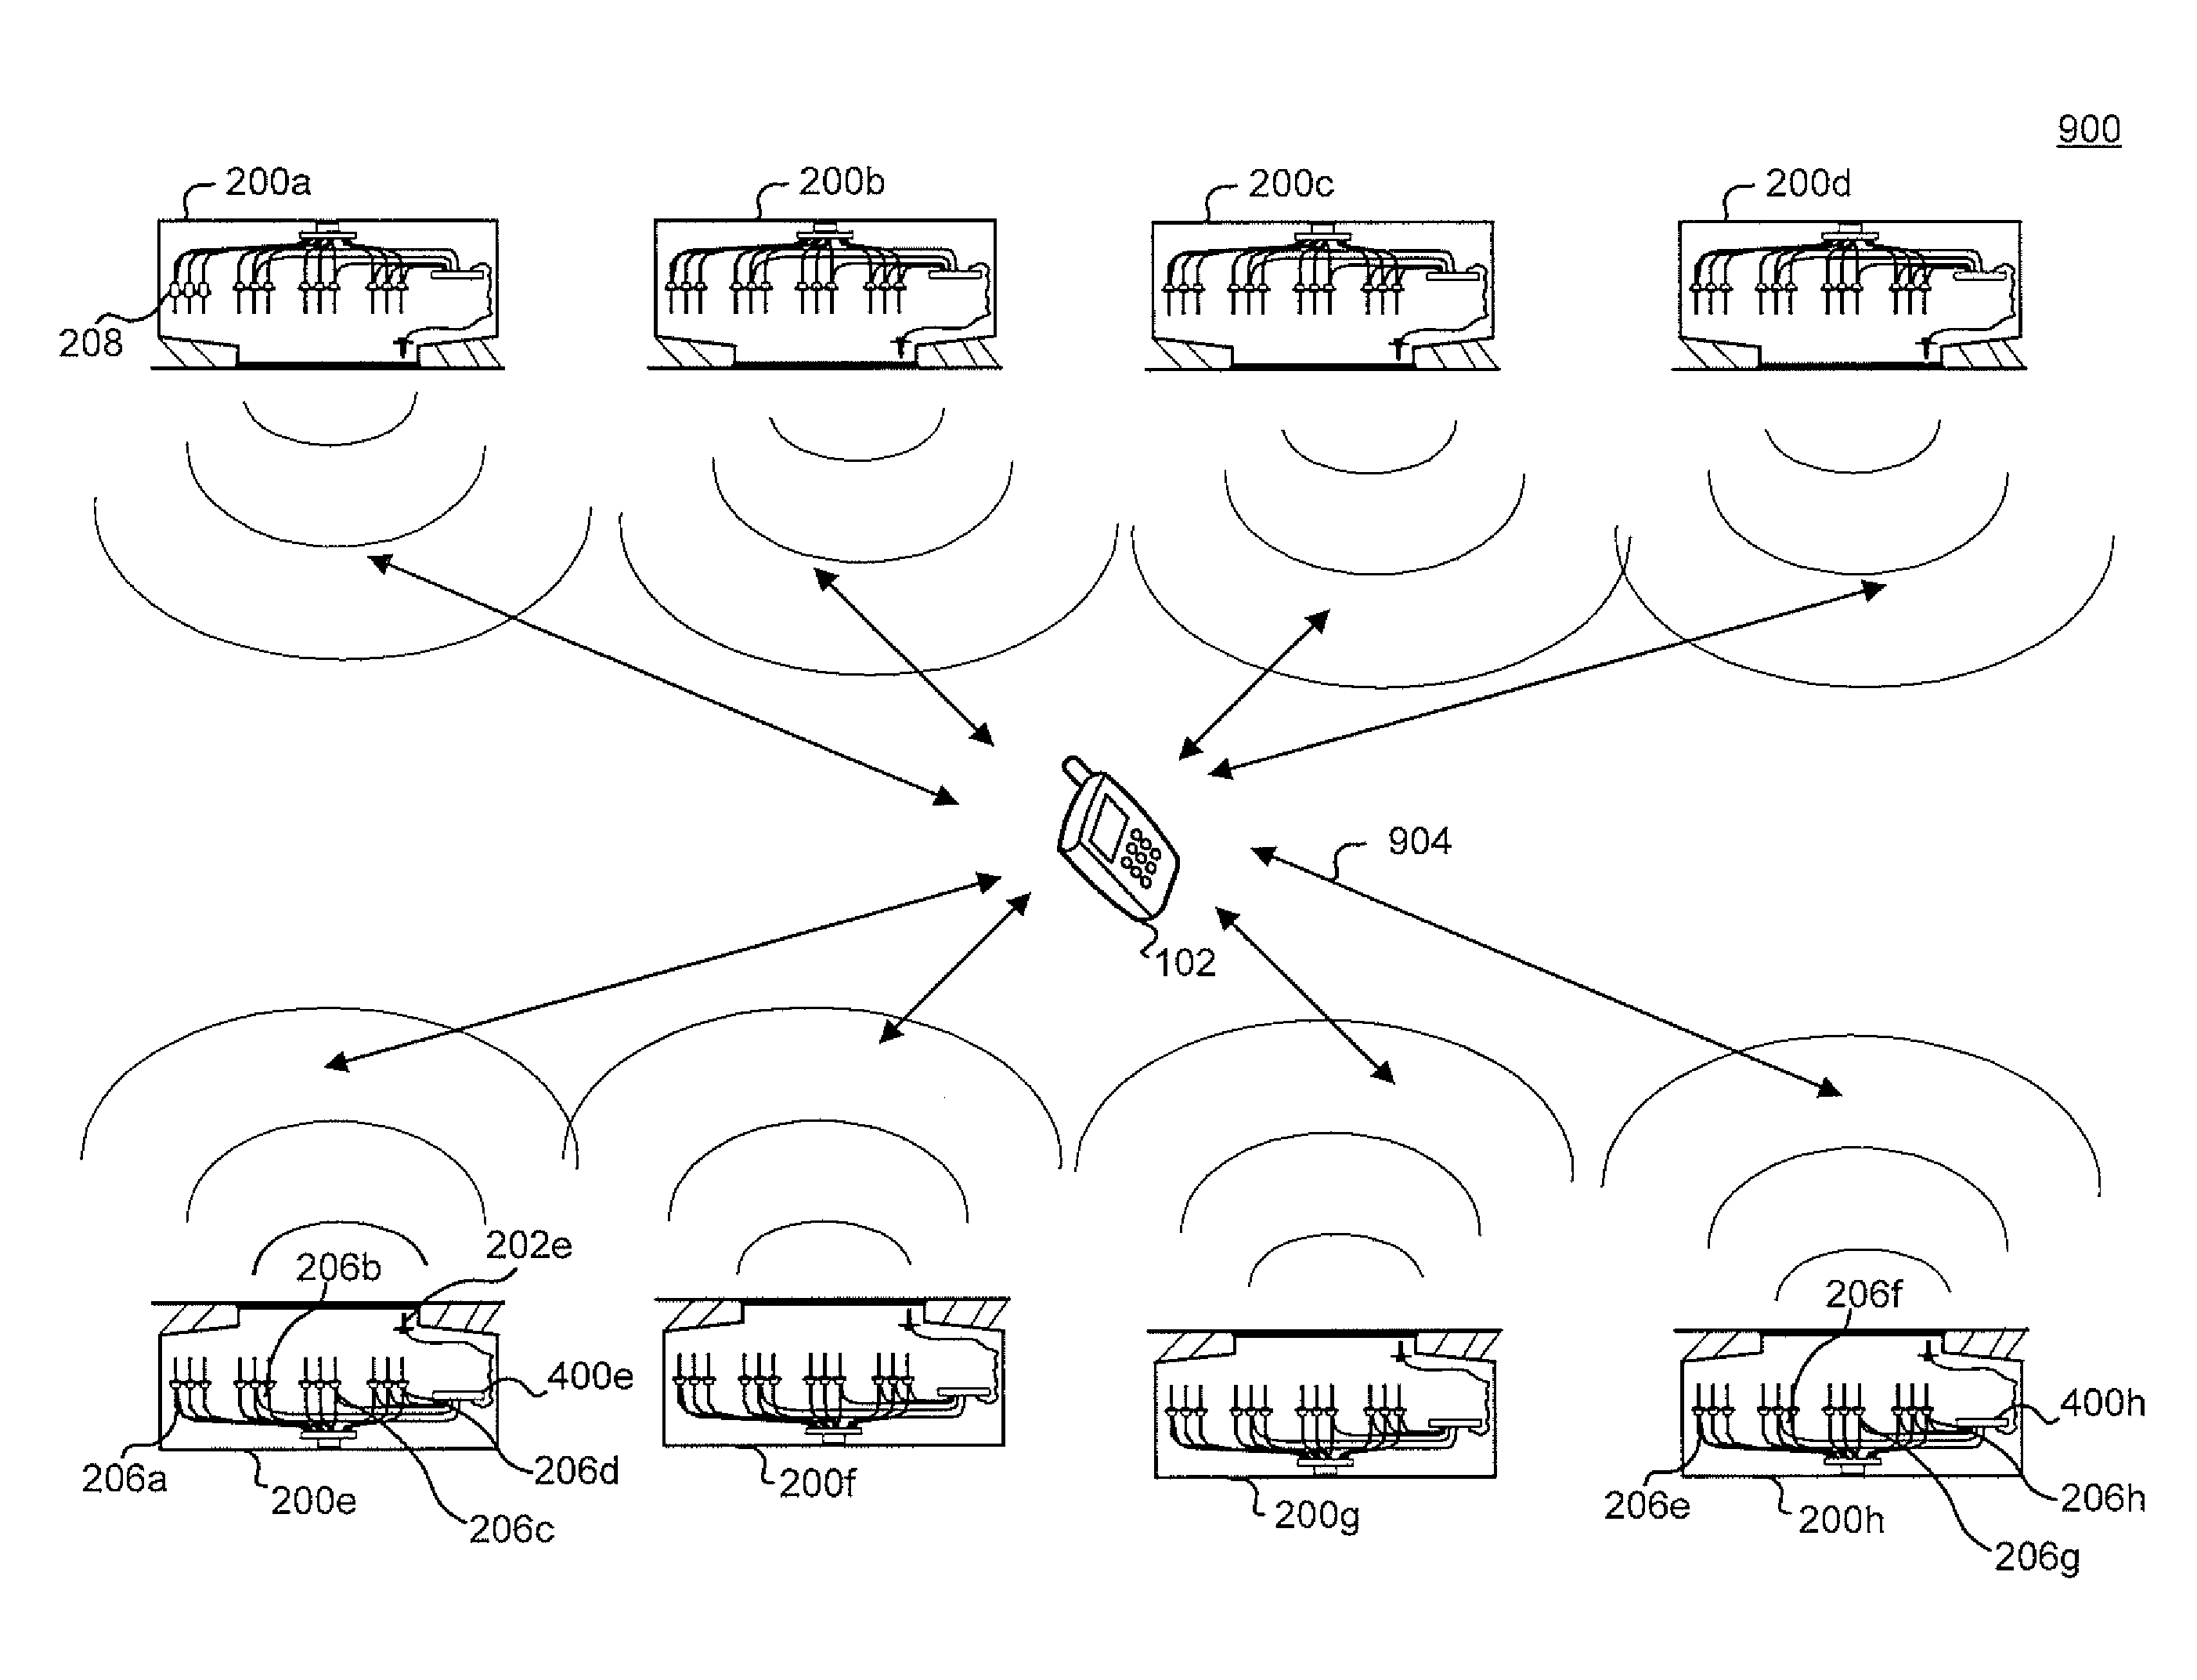 System and method for communicating power system information through a radio frequency device